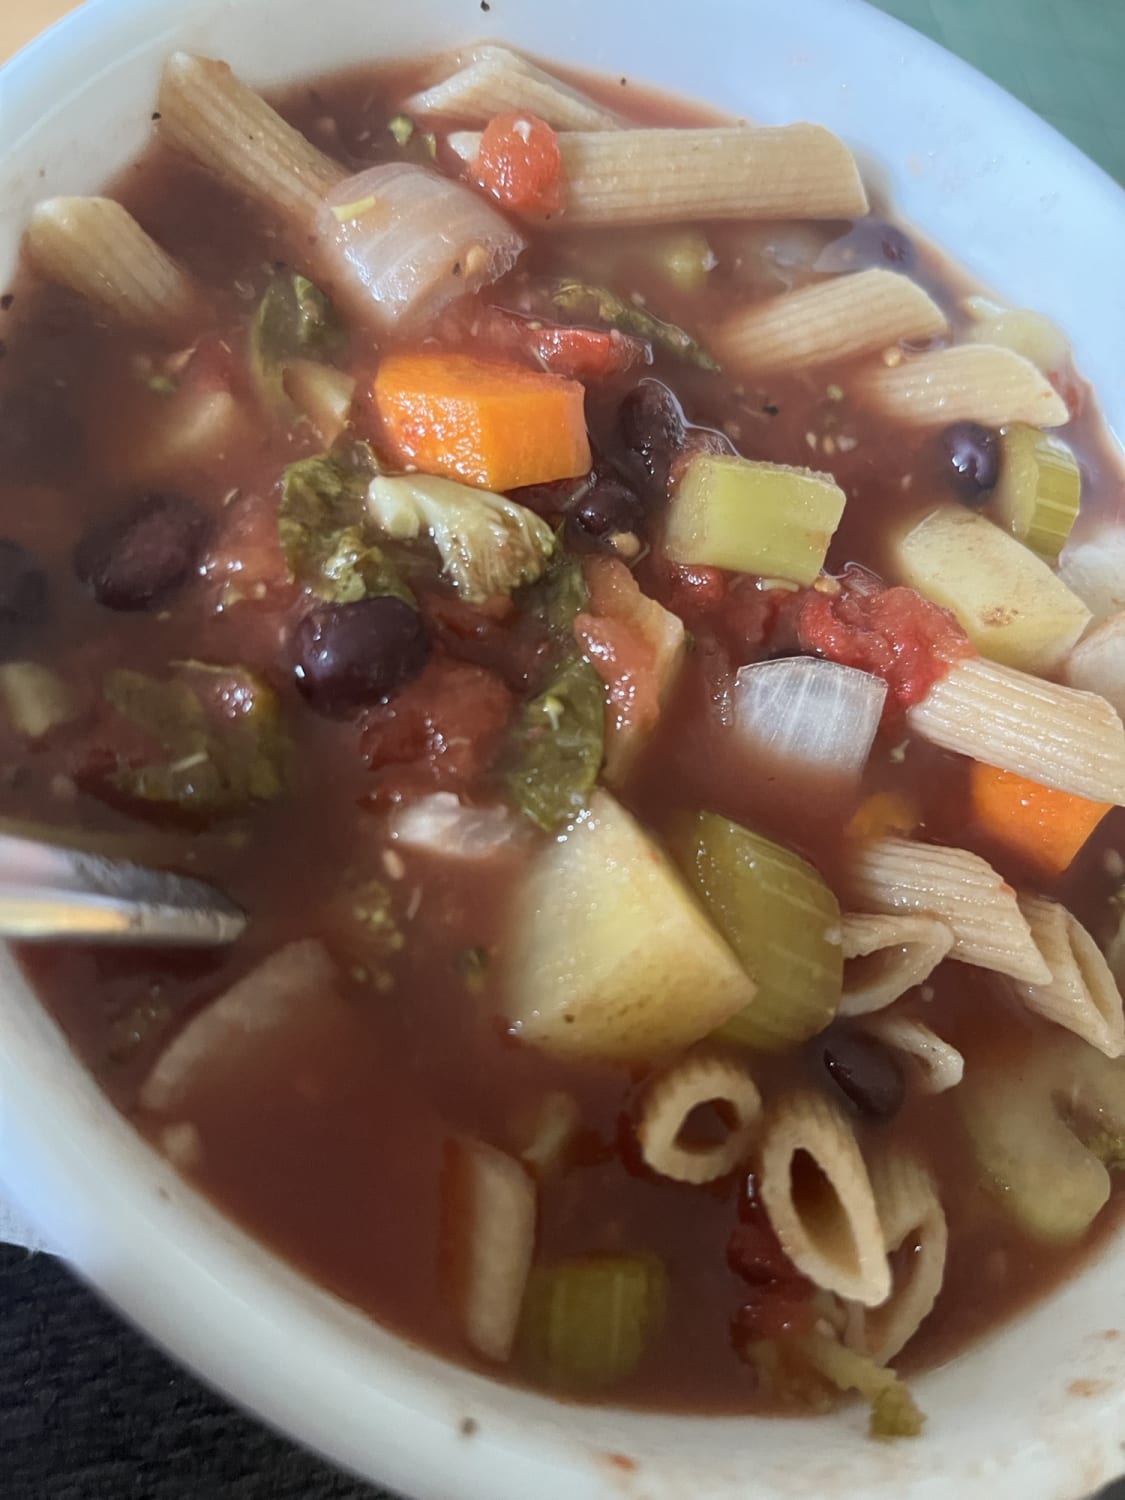 A humongous bowl of minestrone-ish soup